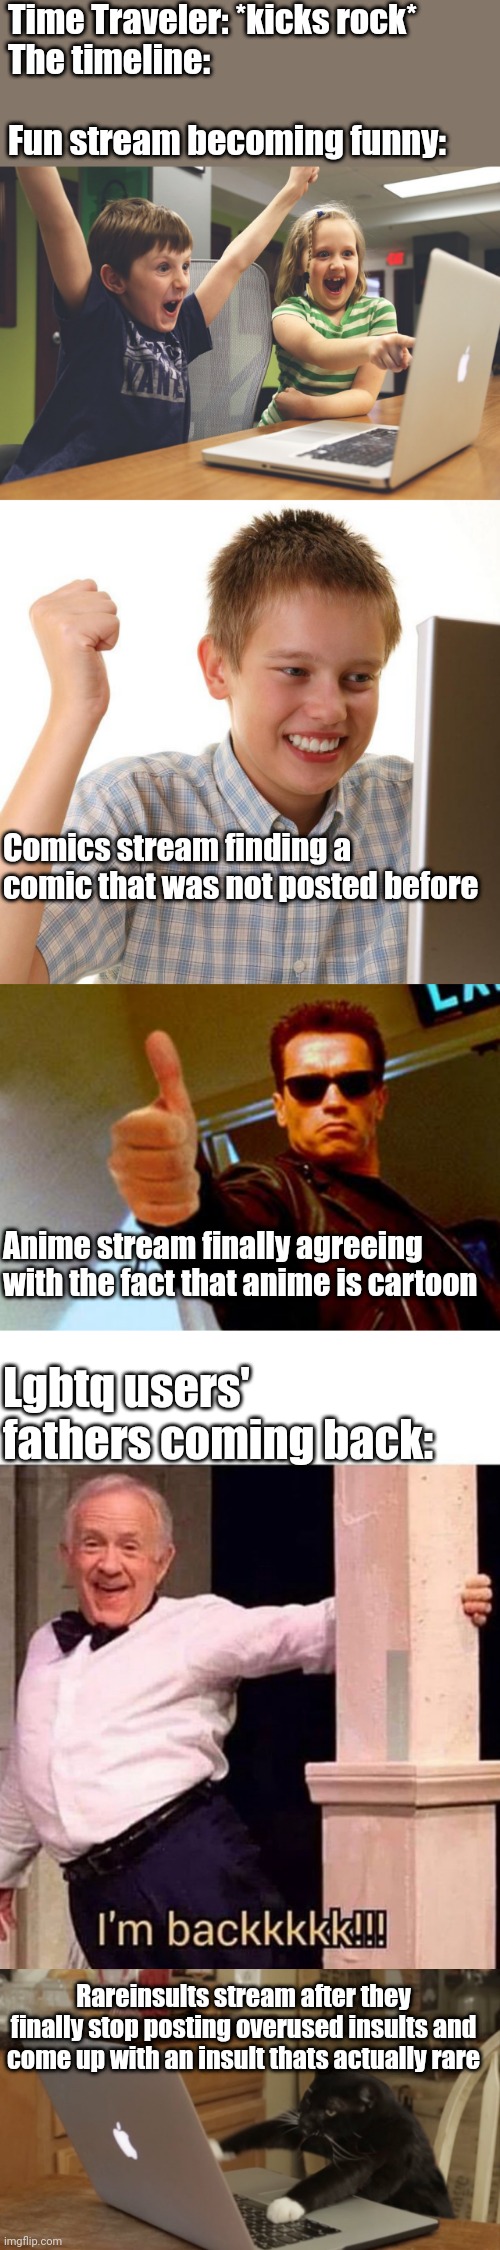 Imgflip slander but different | Time Traveler: *kicks rock*
The timeline:
 
Fun stream becoming funny:; Comics stream finding a comic that was not posted before; Anime stream finally agreeing with the fact that anime is cartoon; Lgbtq users' fathers coming back:; Rareinsults stream after they finally stop posting overused insults and come up with an insult thats actually rare | image tagged in slander,memes,unfunny,imgflip,streams,funny | made w/ Imgflip meme maker